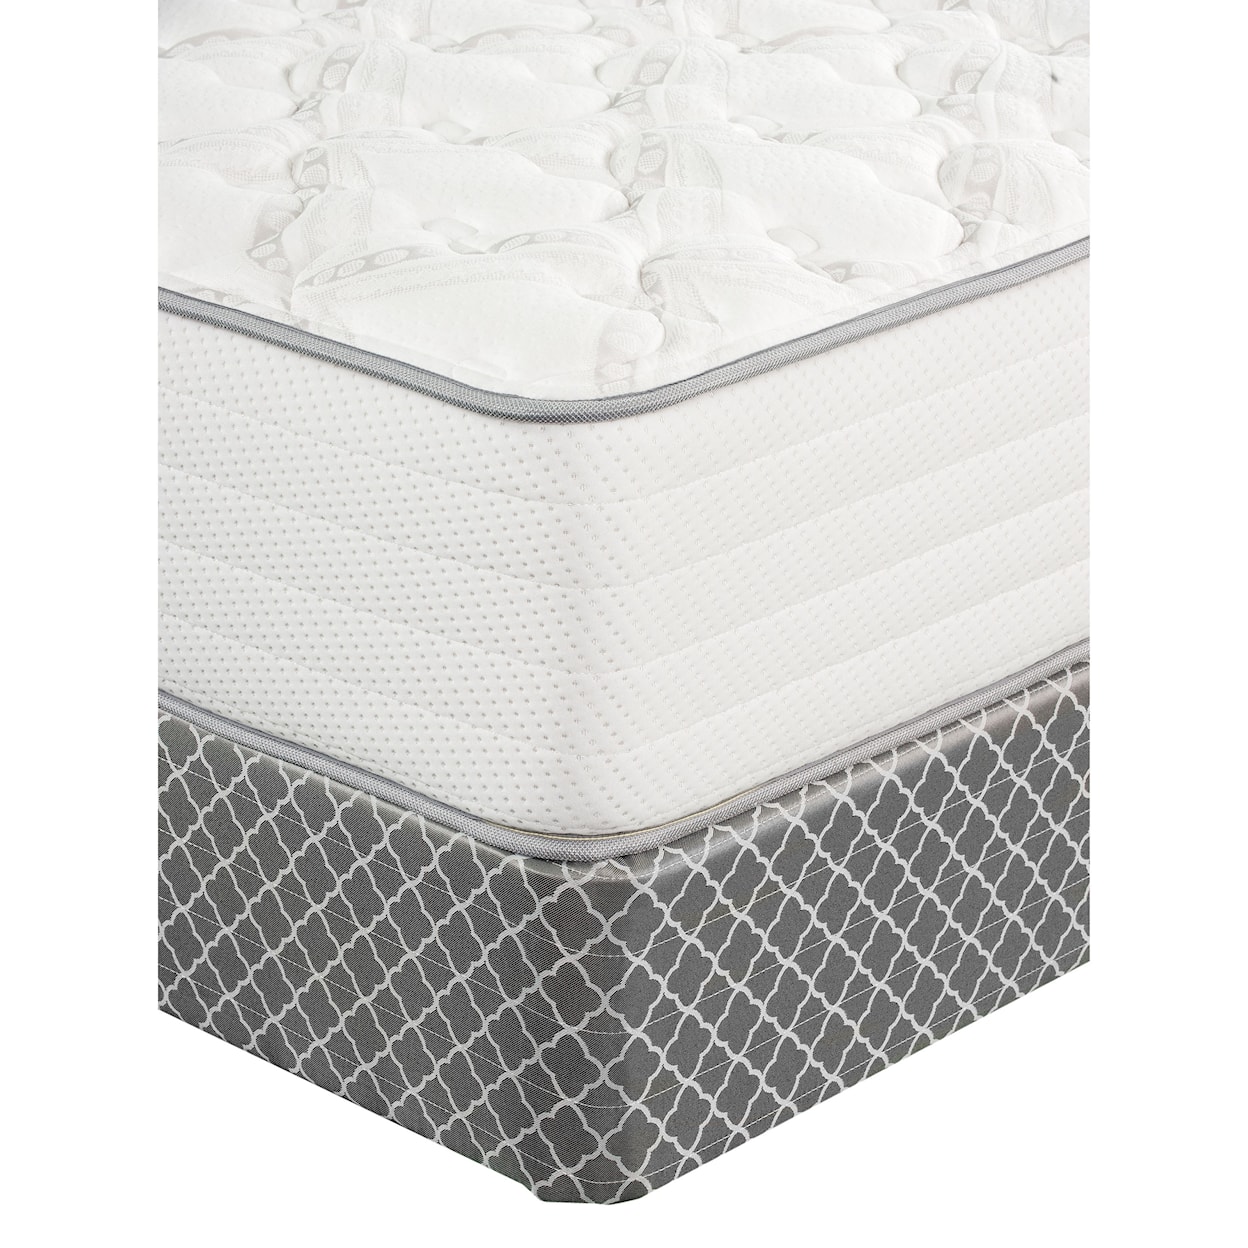 King Koil Gracie Firm Full Firm Pocketed Coil Mattress Set